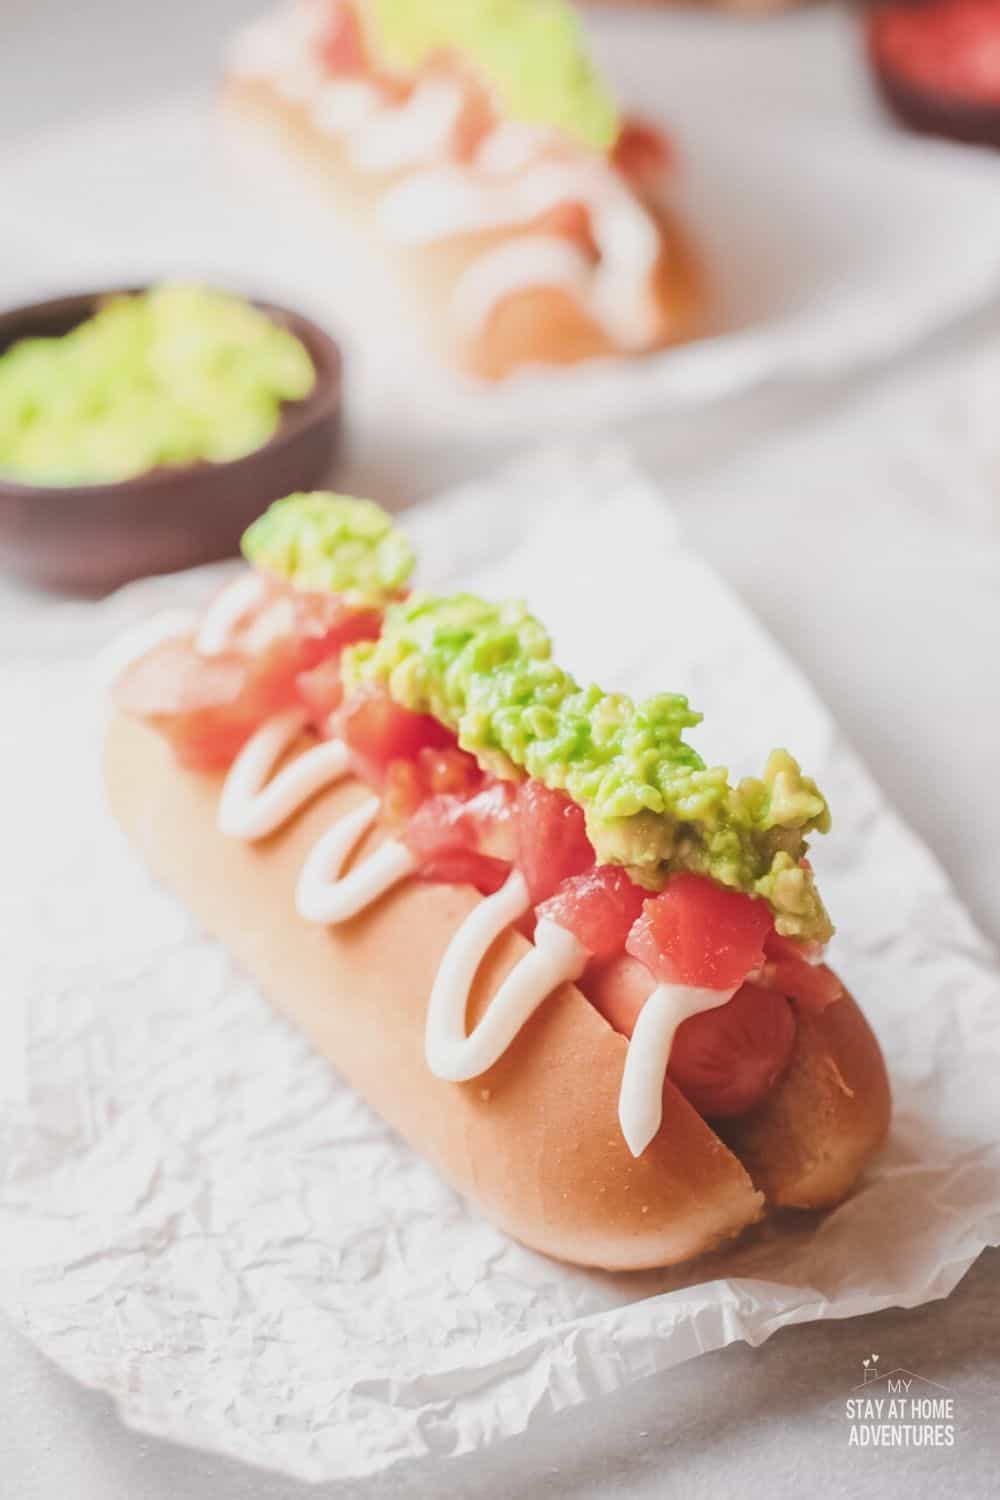 Completos are Chile's popular "loaded" hot dogs that are not your regular boring American hot dogs! Learn more when you click the link. via @mystayathome